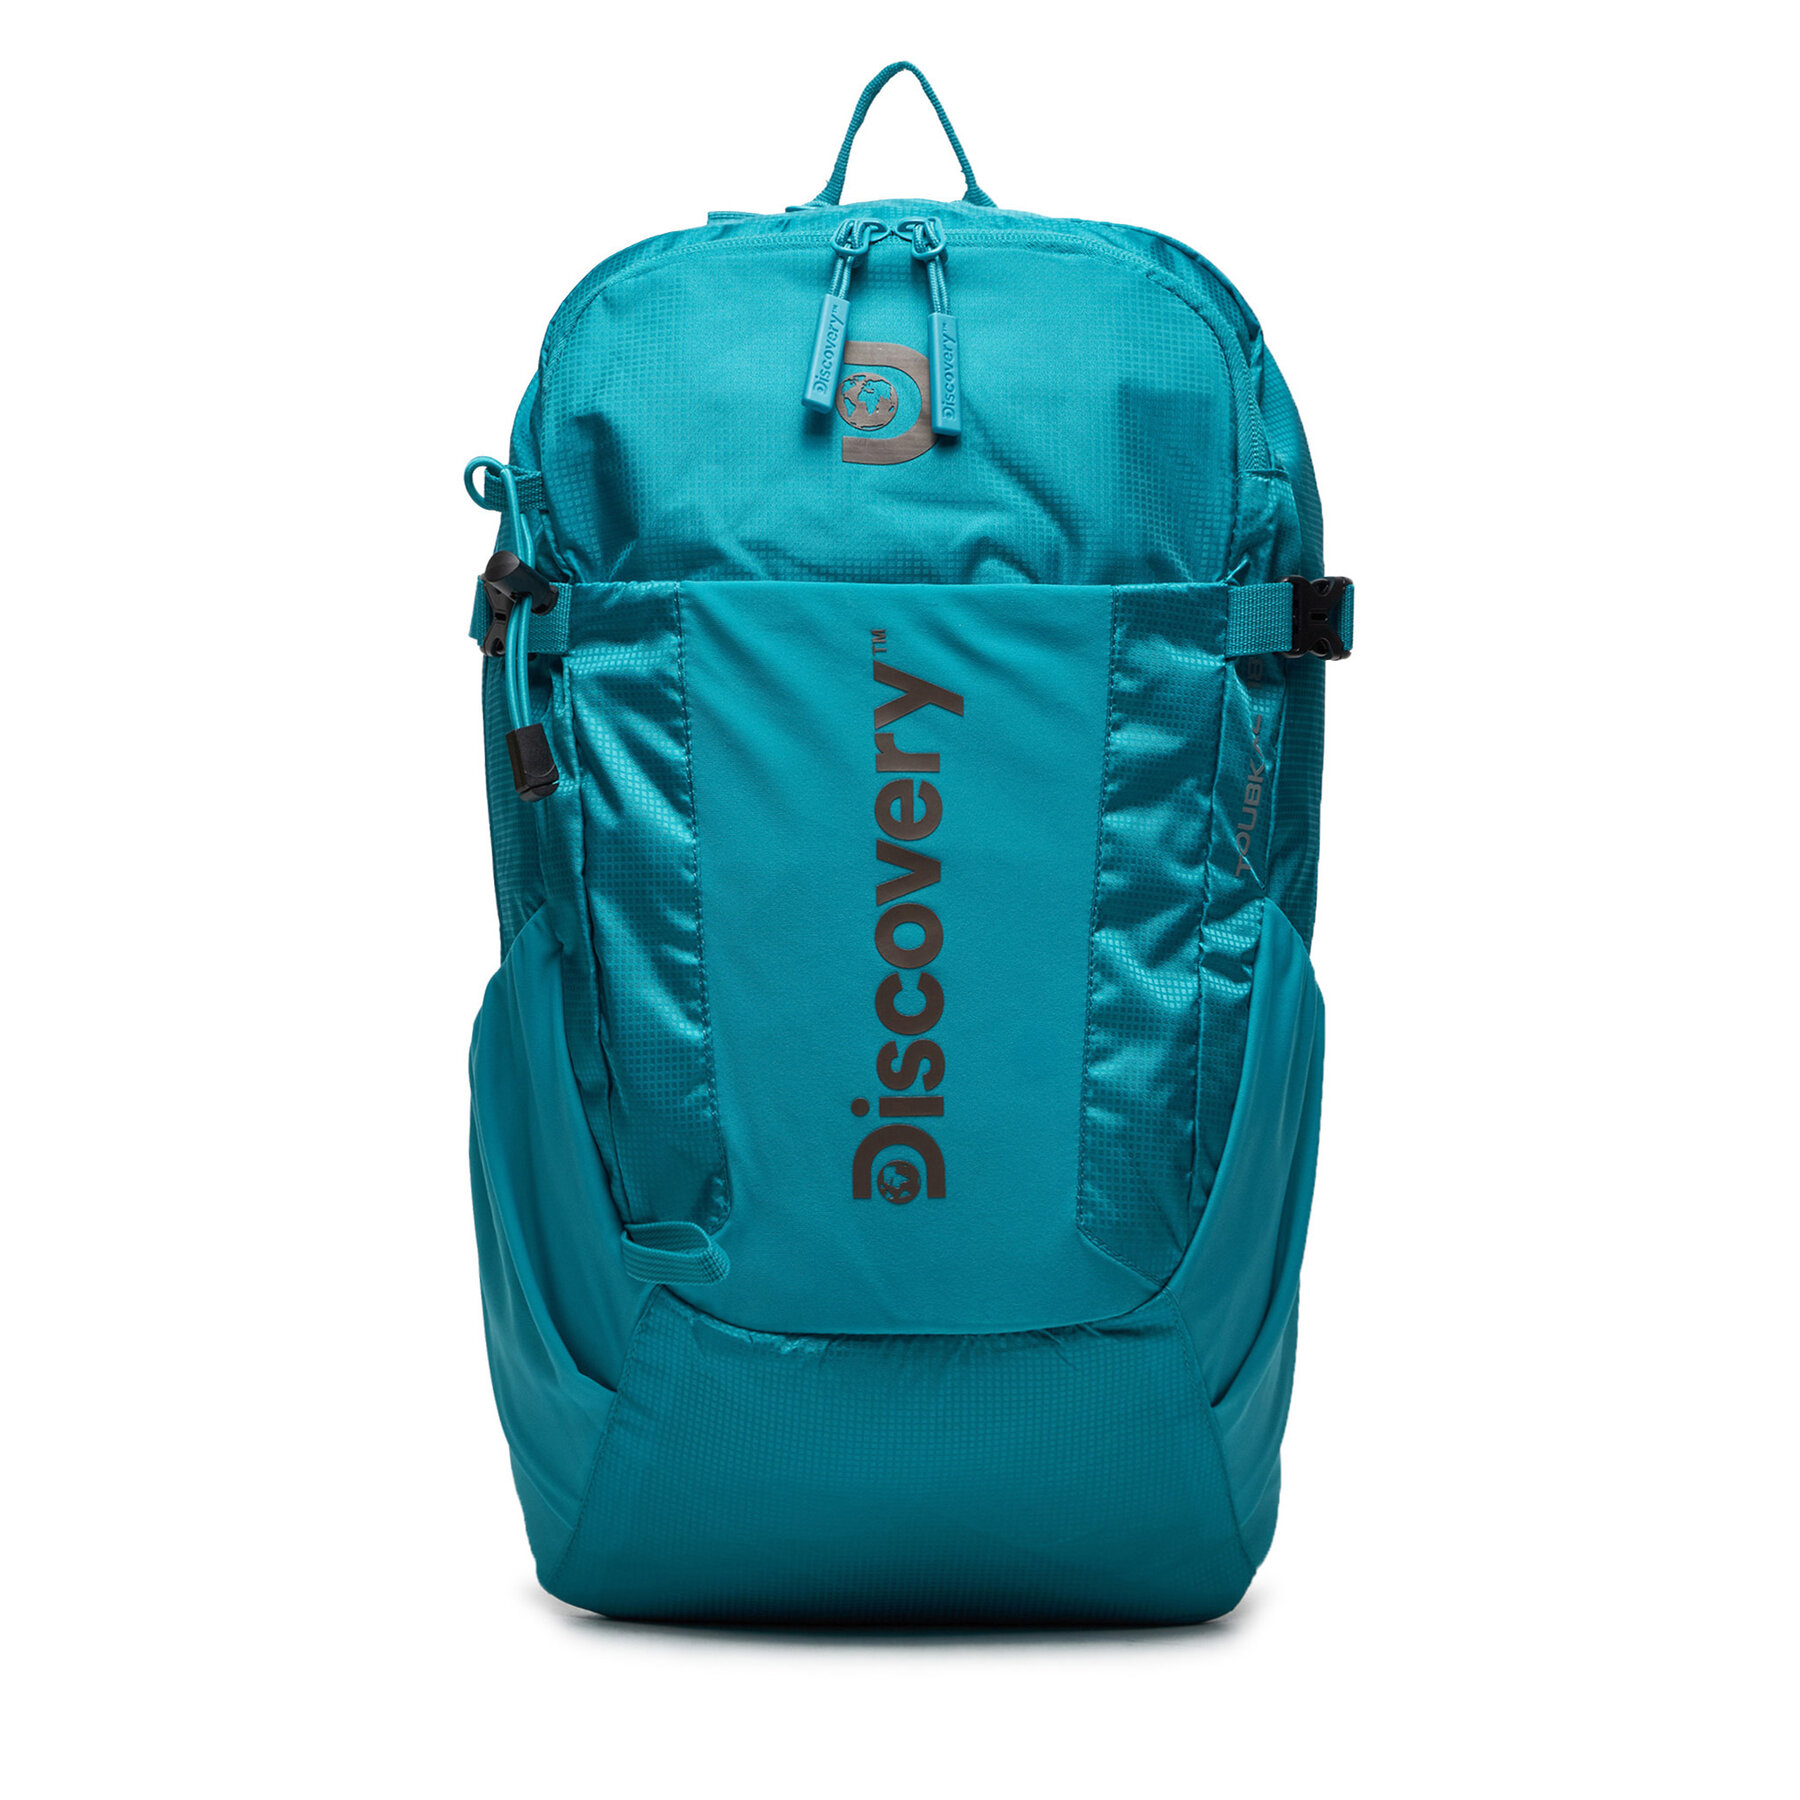 Rucksack Discovery Toubkal 18 D00611.39 Blau von Discovery